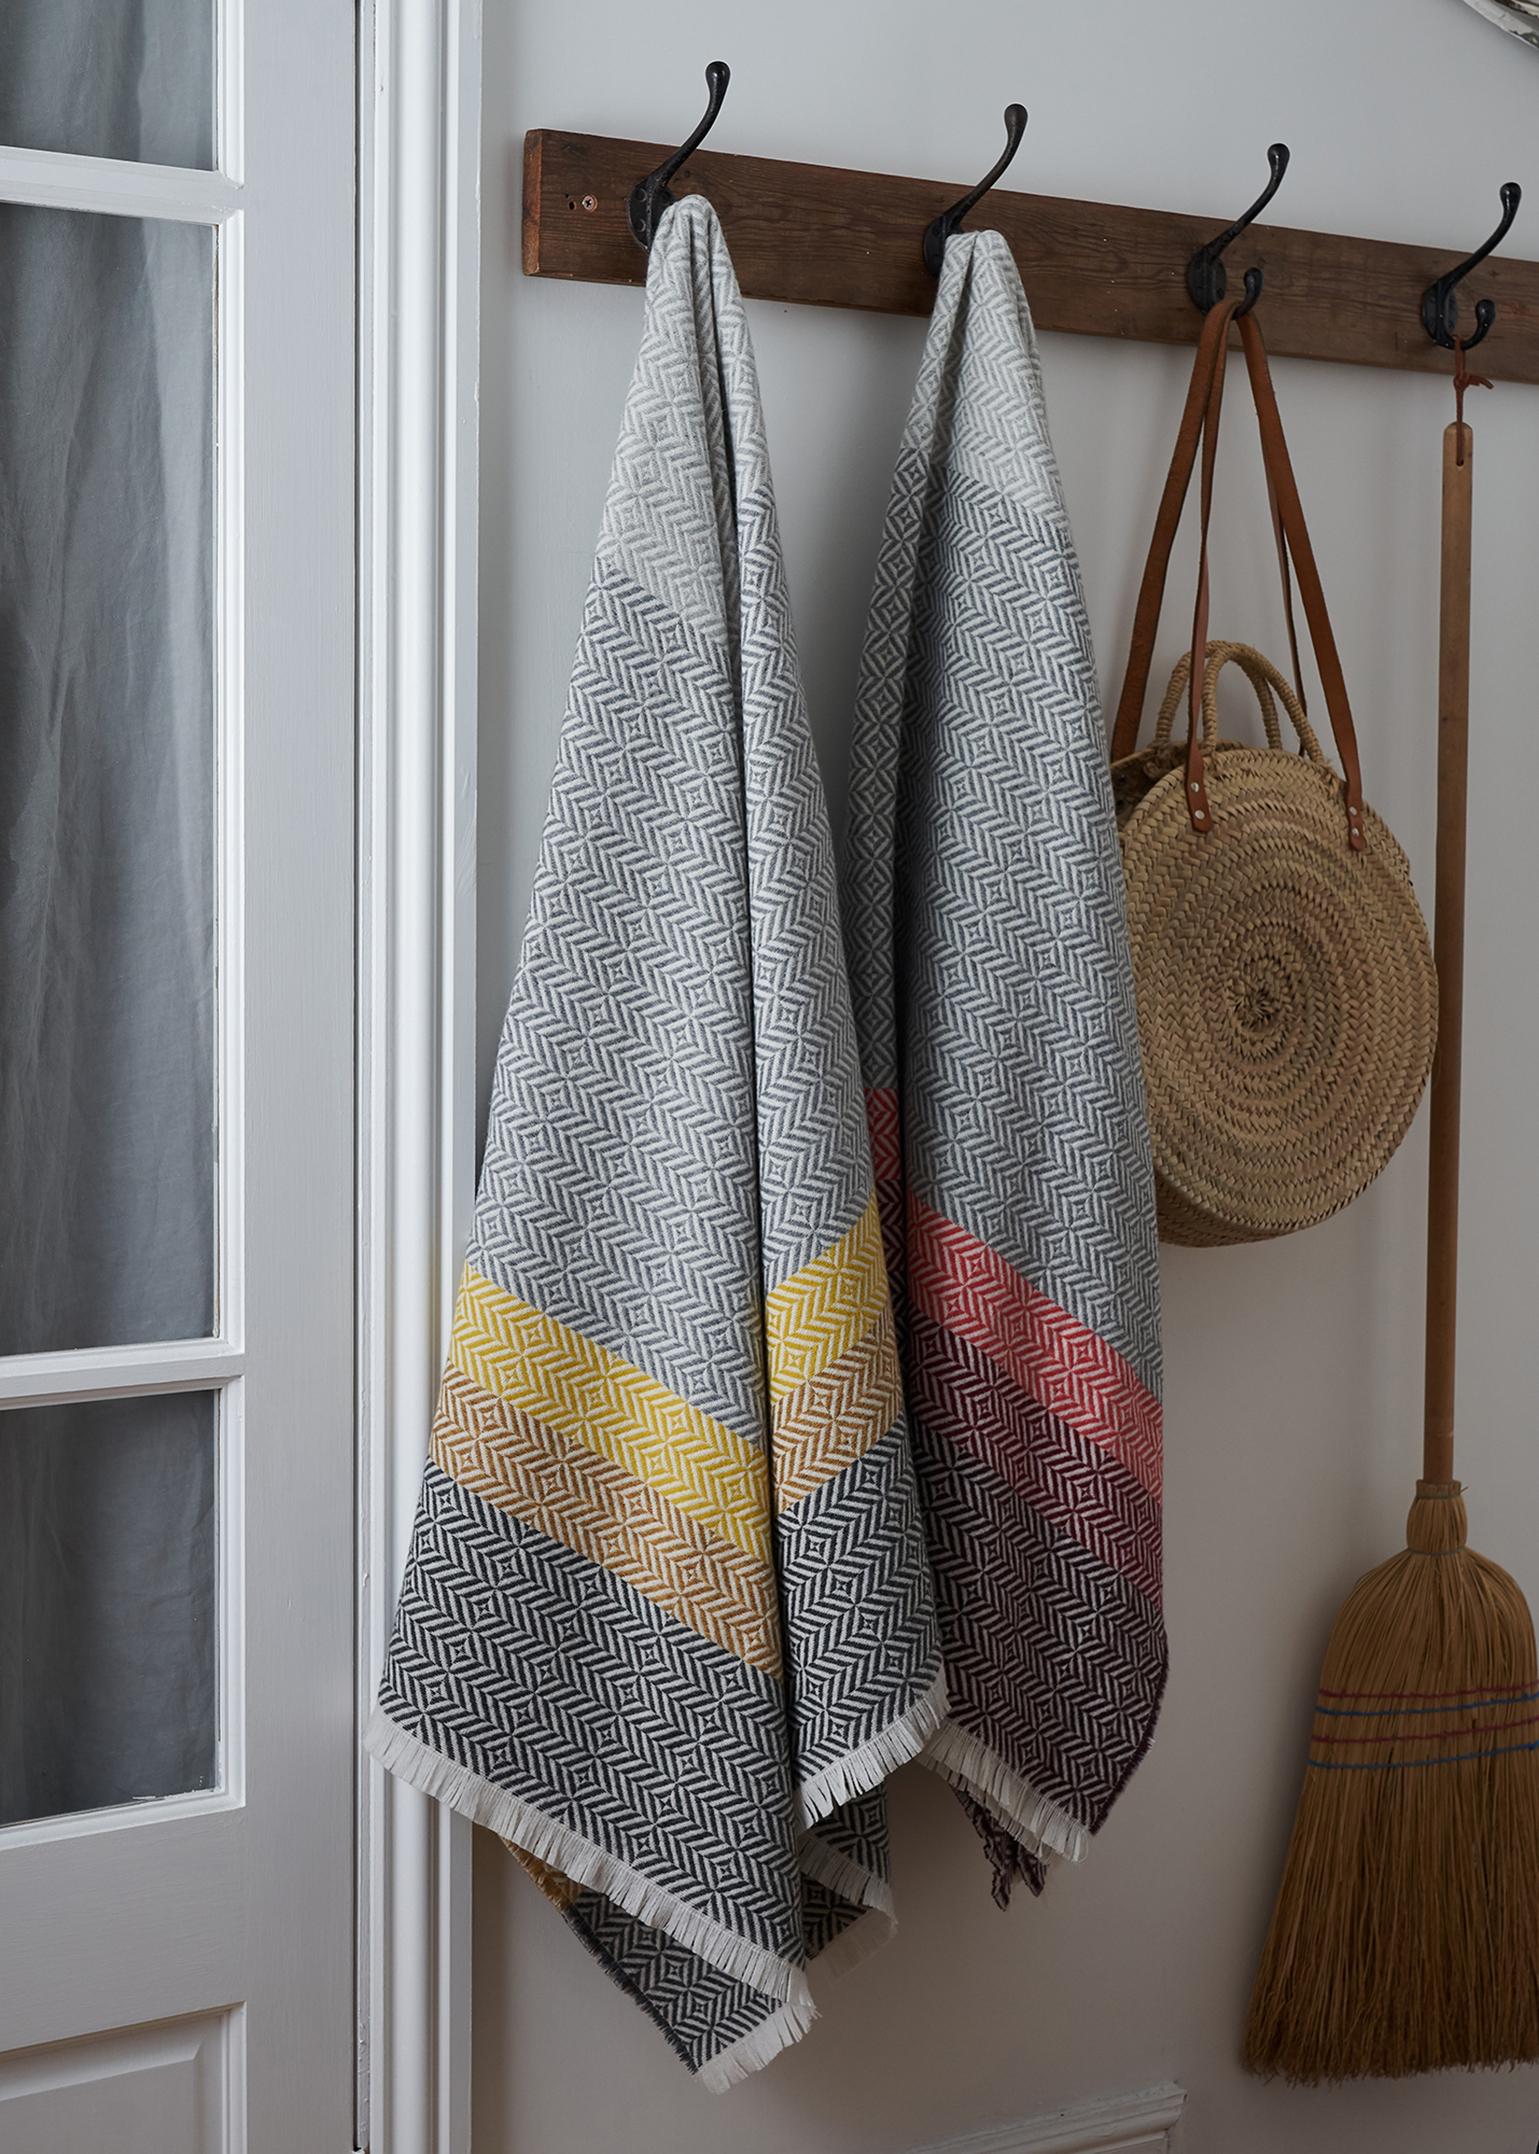 Drawing inspiration from the color and pattern found in stain glass work, the Uccle block throw takes its name from an area of Brussels renowned for its Art Deco architecture.

Woven in blocks of grey and pearl grey melange with a deep border of